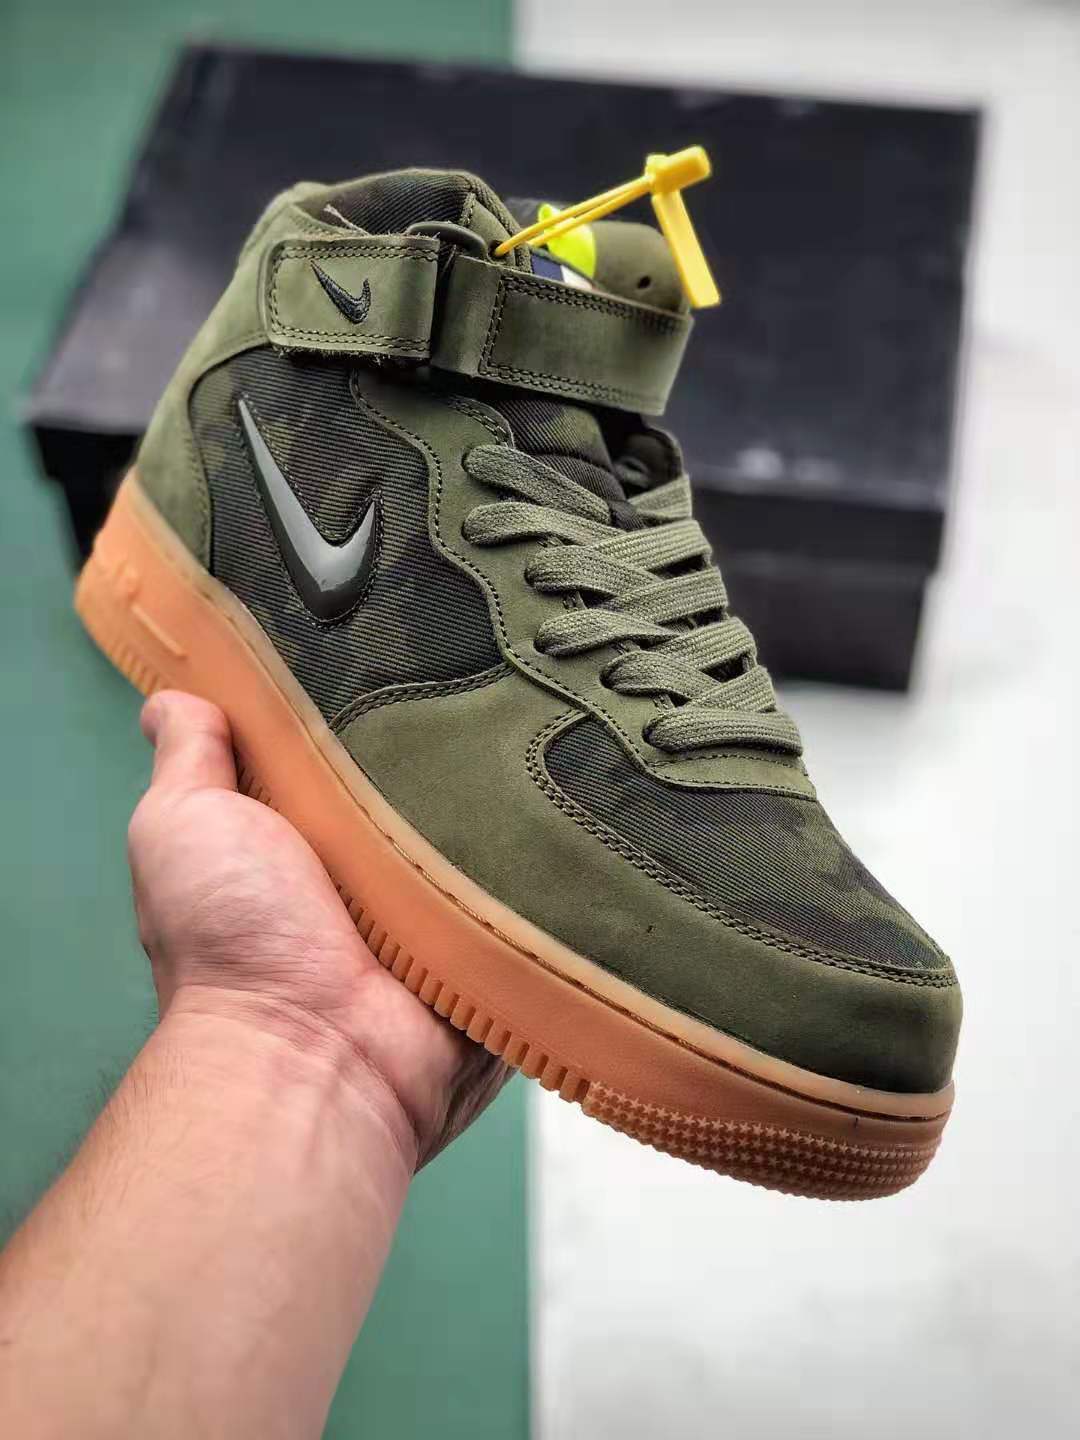 Nike Air Force 1 Mid Country Camo France AV2586-200 - Stylish and Unique Sneakers